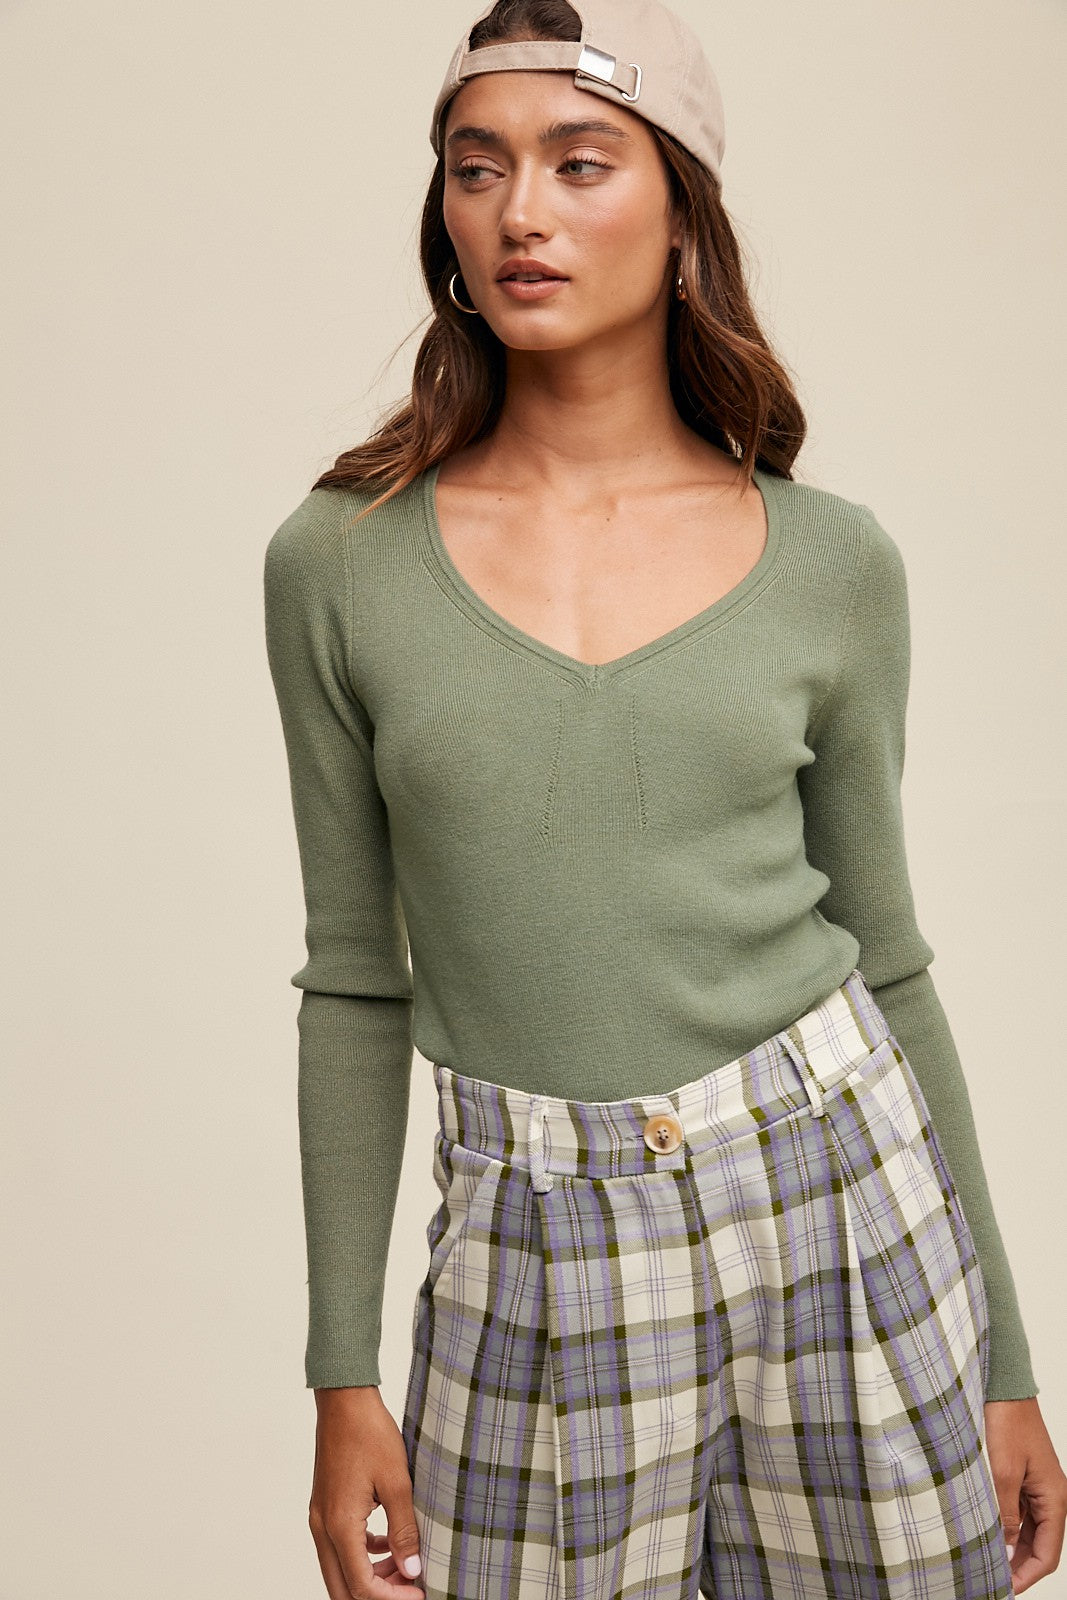 The Shiloh Ribbed Sweater